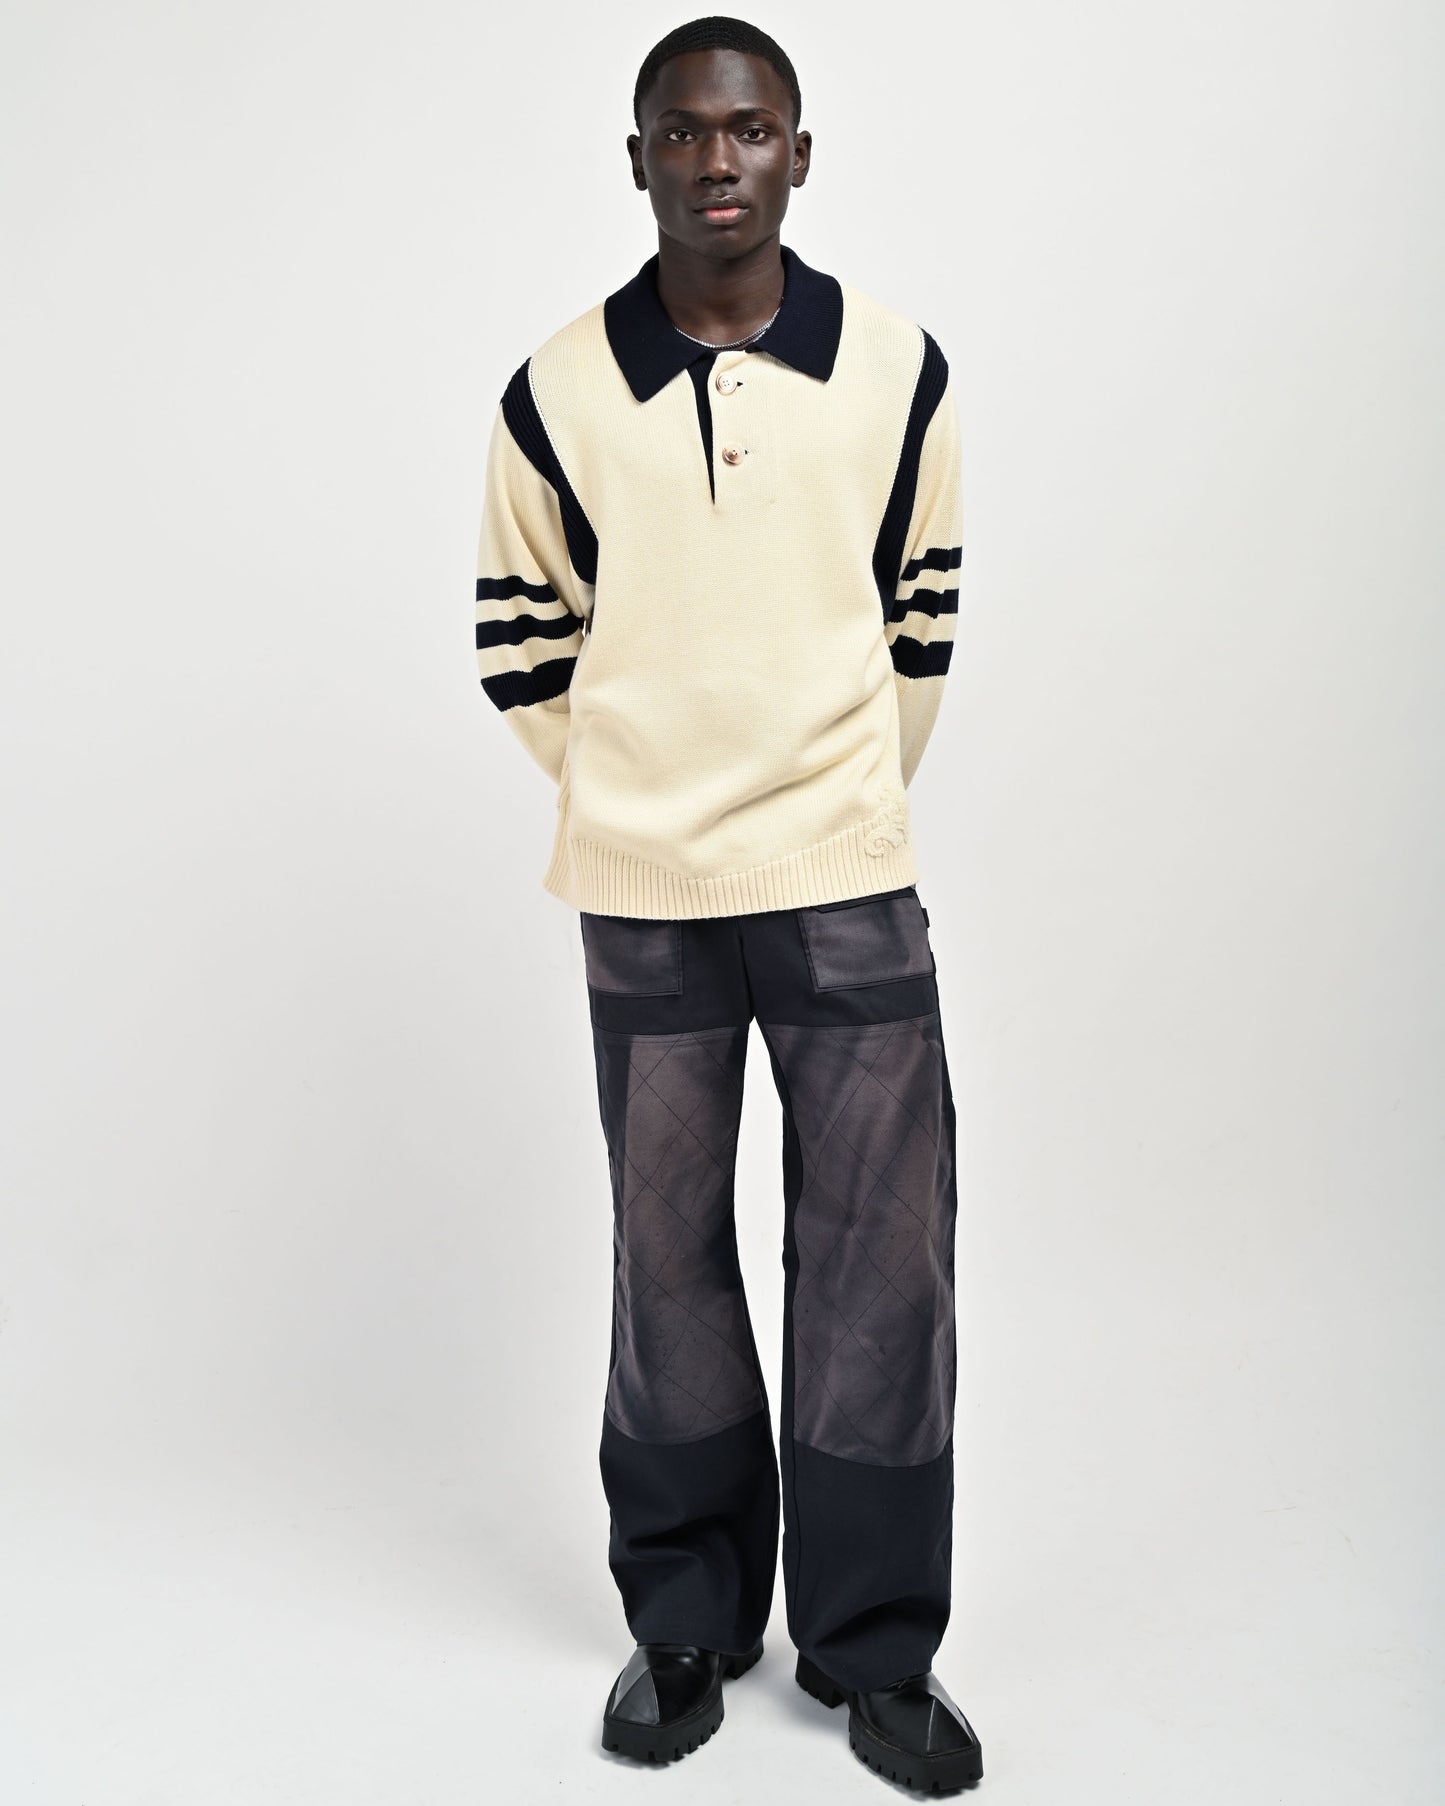 Model is wearing Kai Rugby Sweater in Cream and Black by Aseye Studio